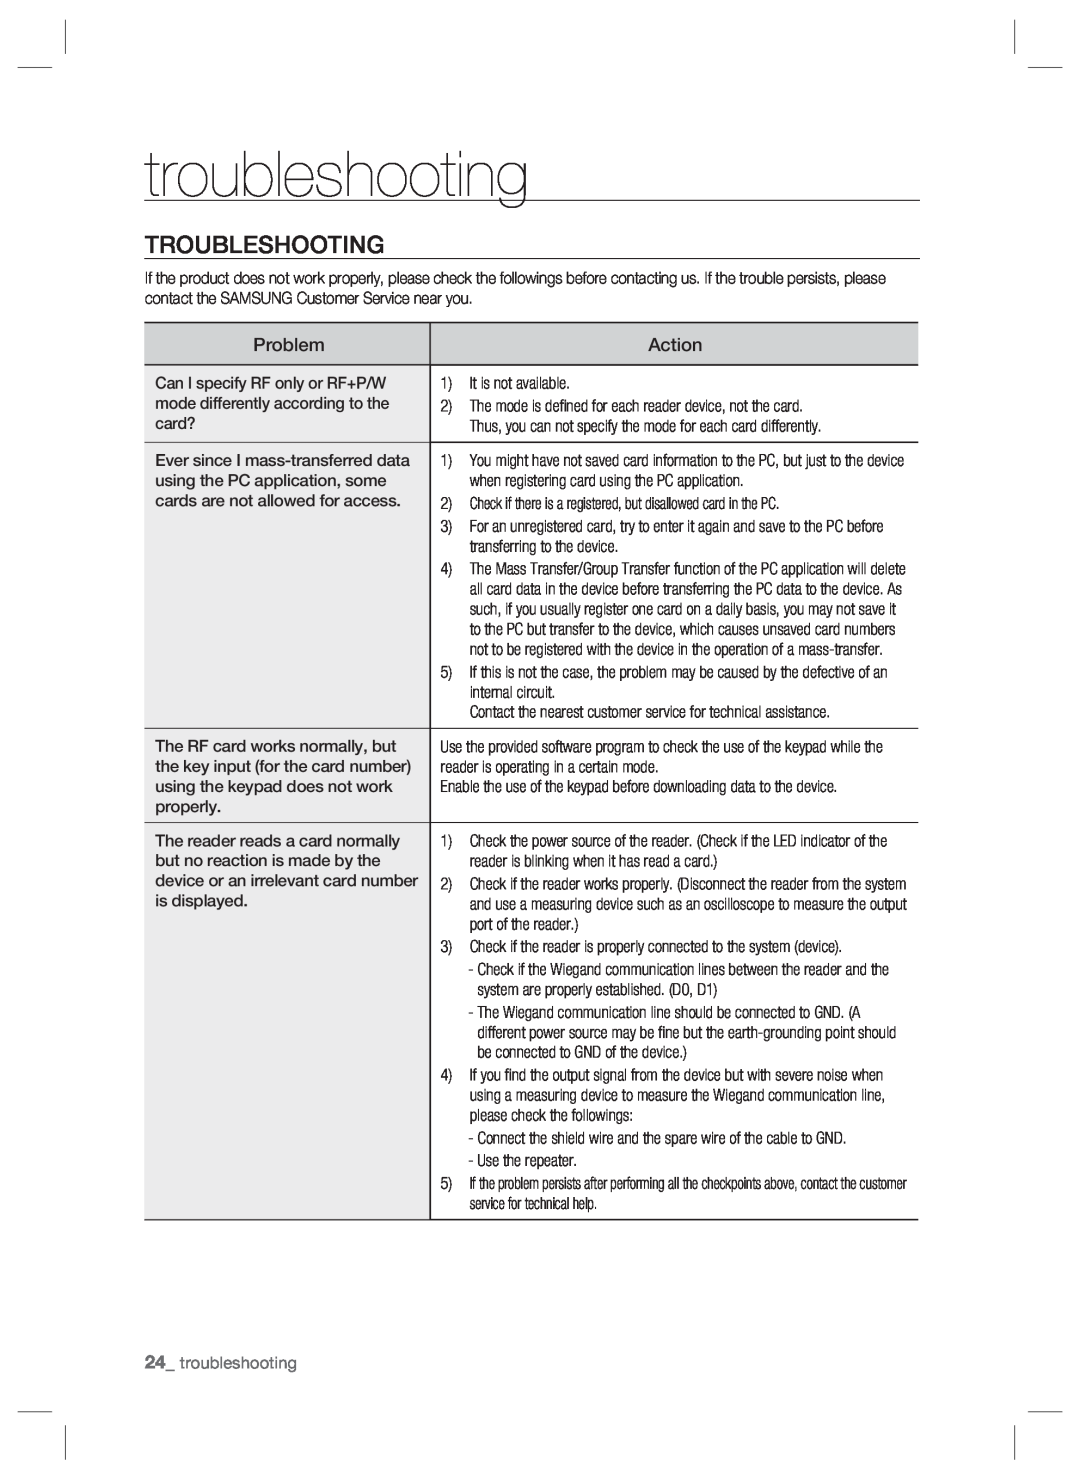 Samsung SSA-P400T, SSA-P401T user manual troubleshooting, Troubleshooting 